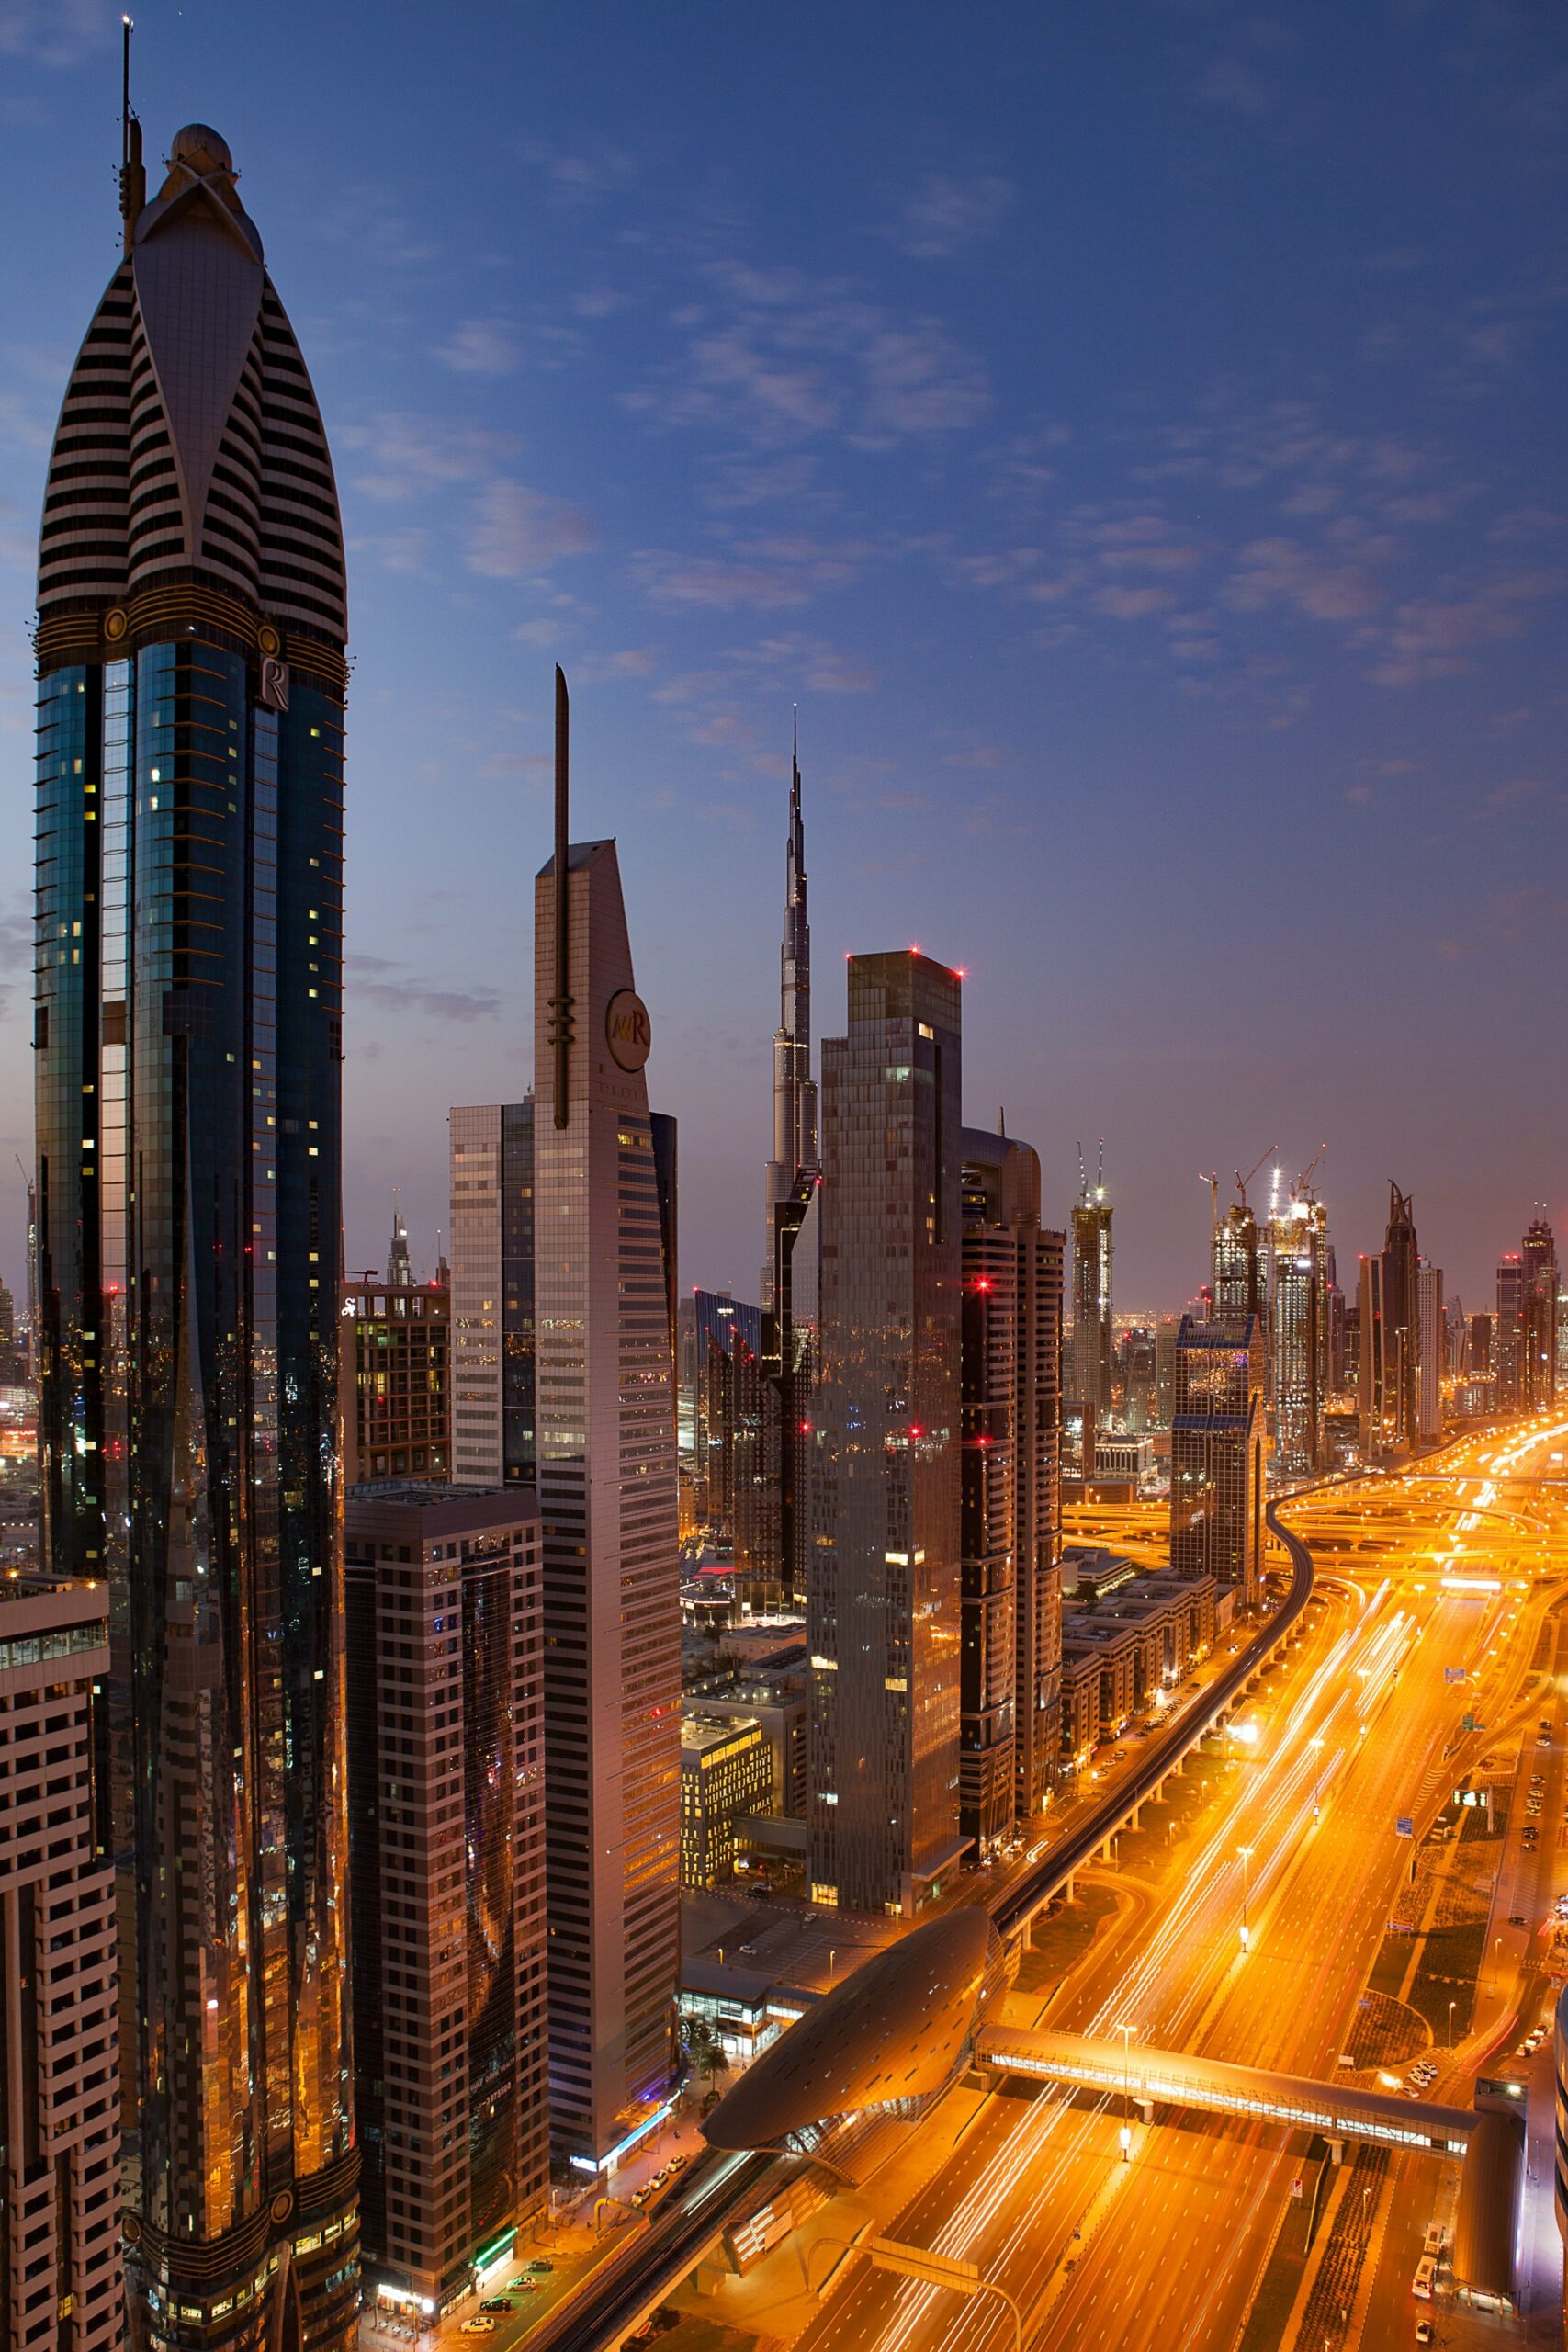 Which Area of Dubai is Most Luxury?